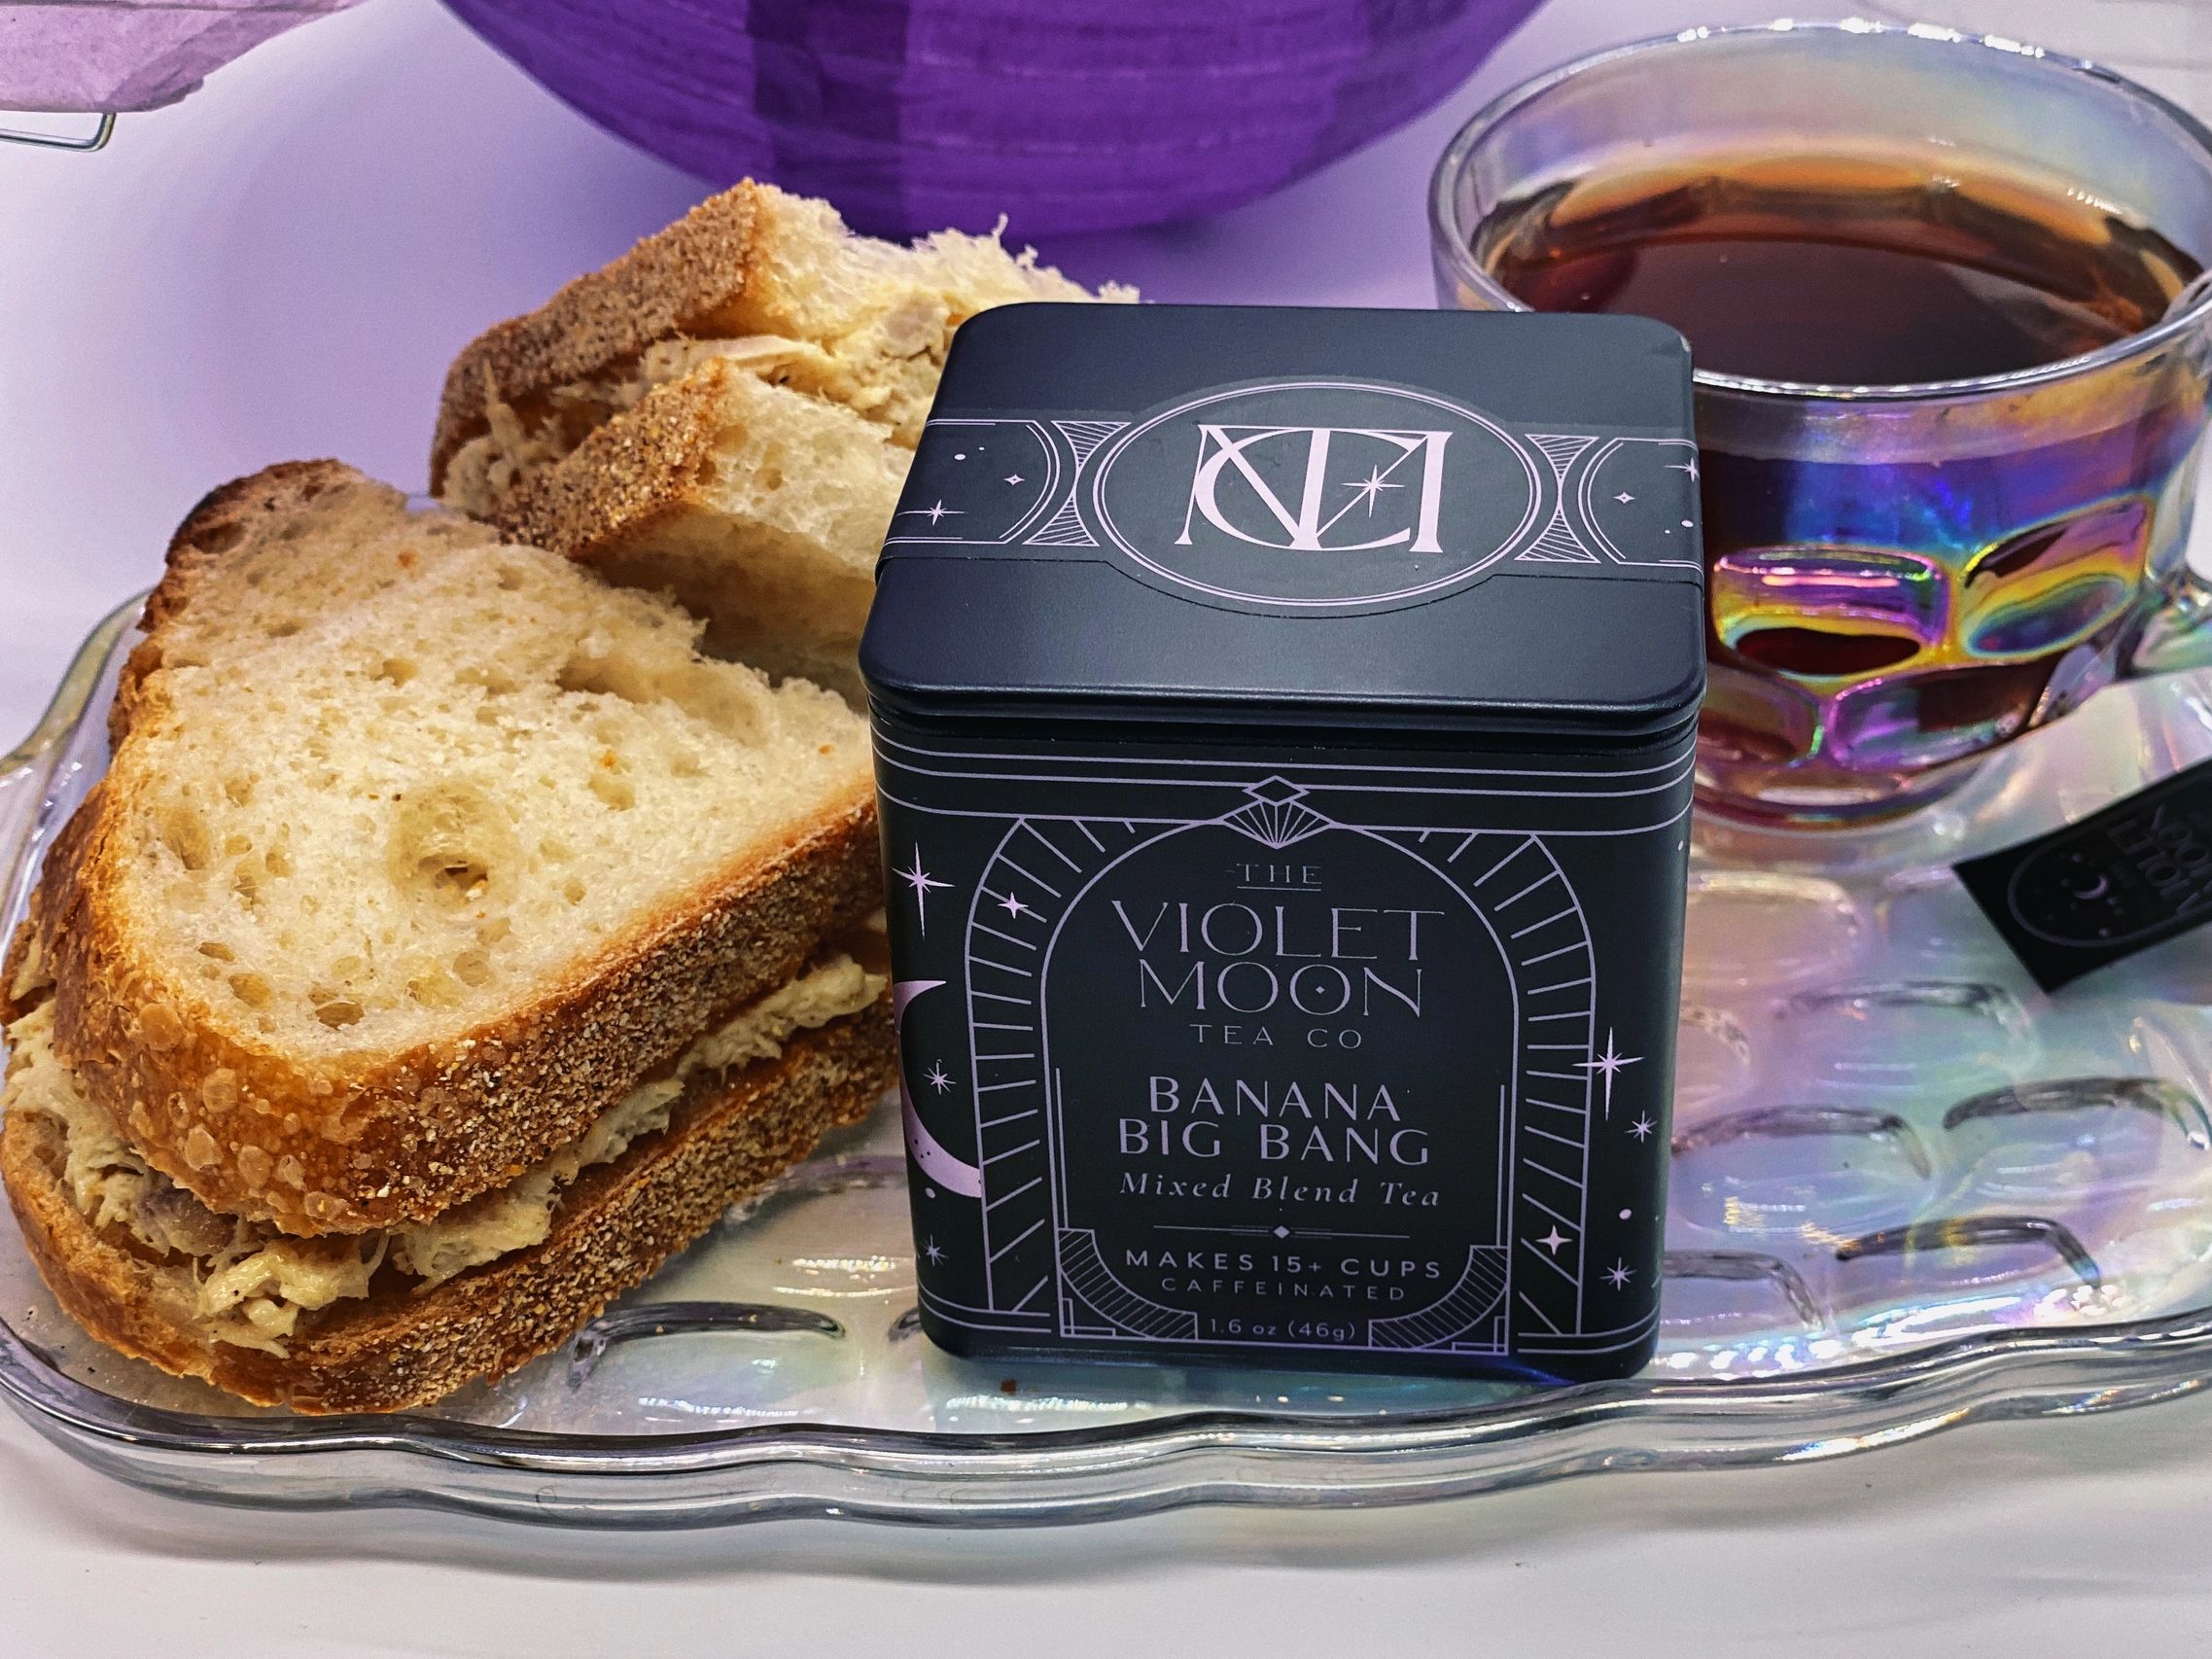 A black tin of Banana Big Bang tea on a plate with a cup of tea and a sandwich